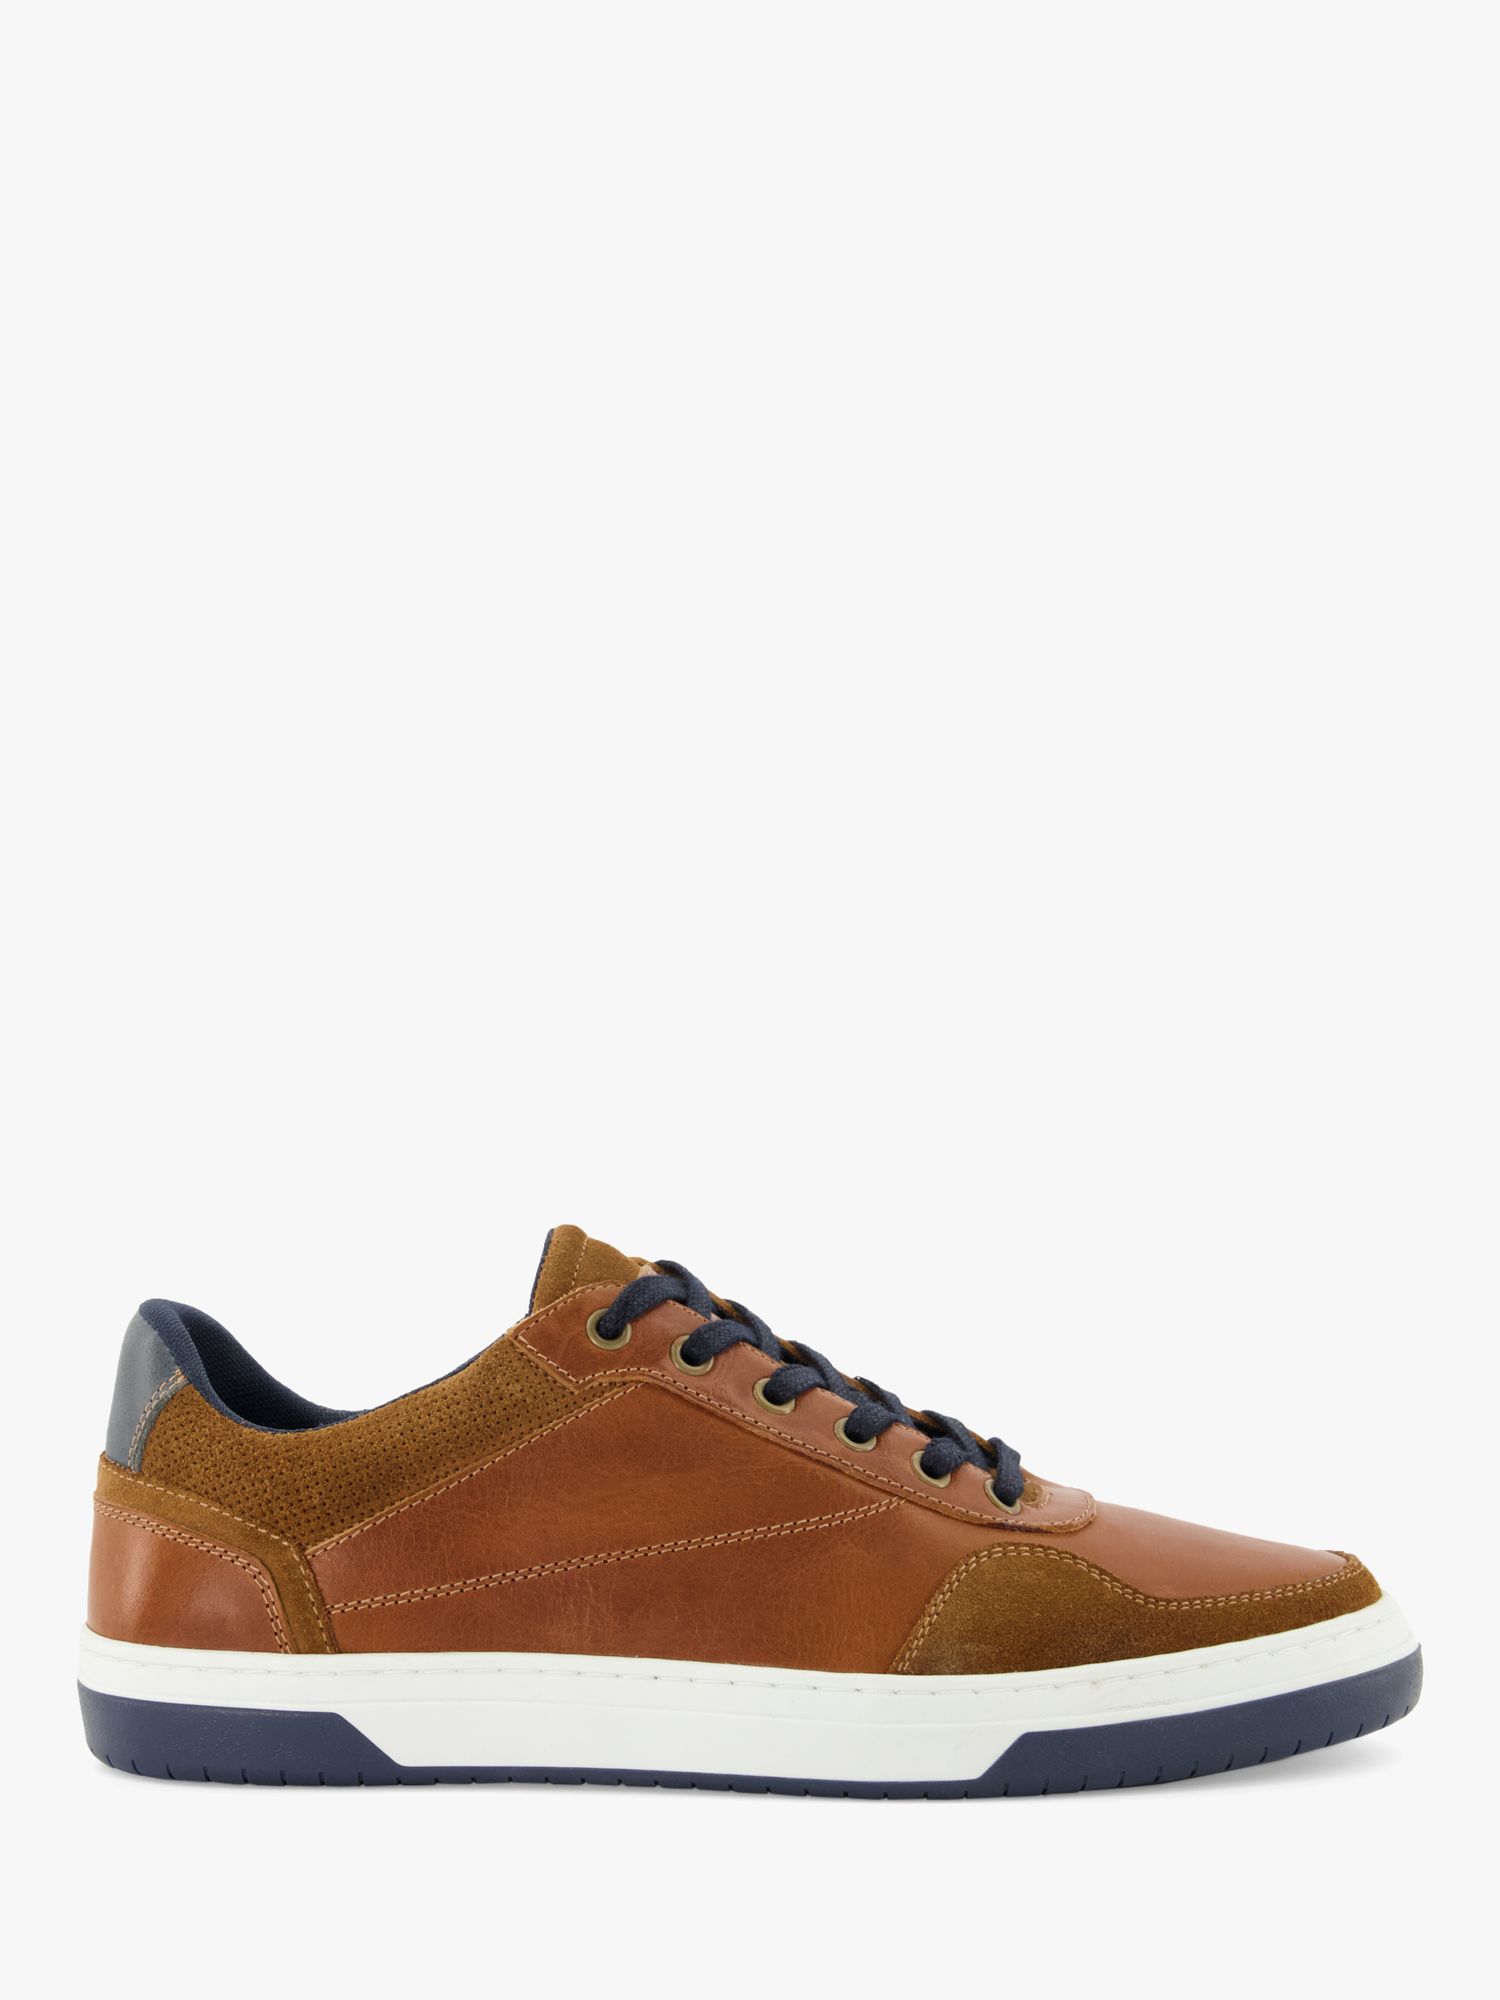 Dune Thorin Leather Lace Up Trainers, Tan, EU40